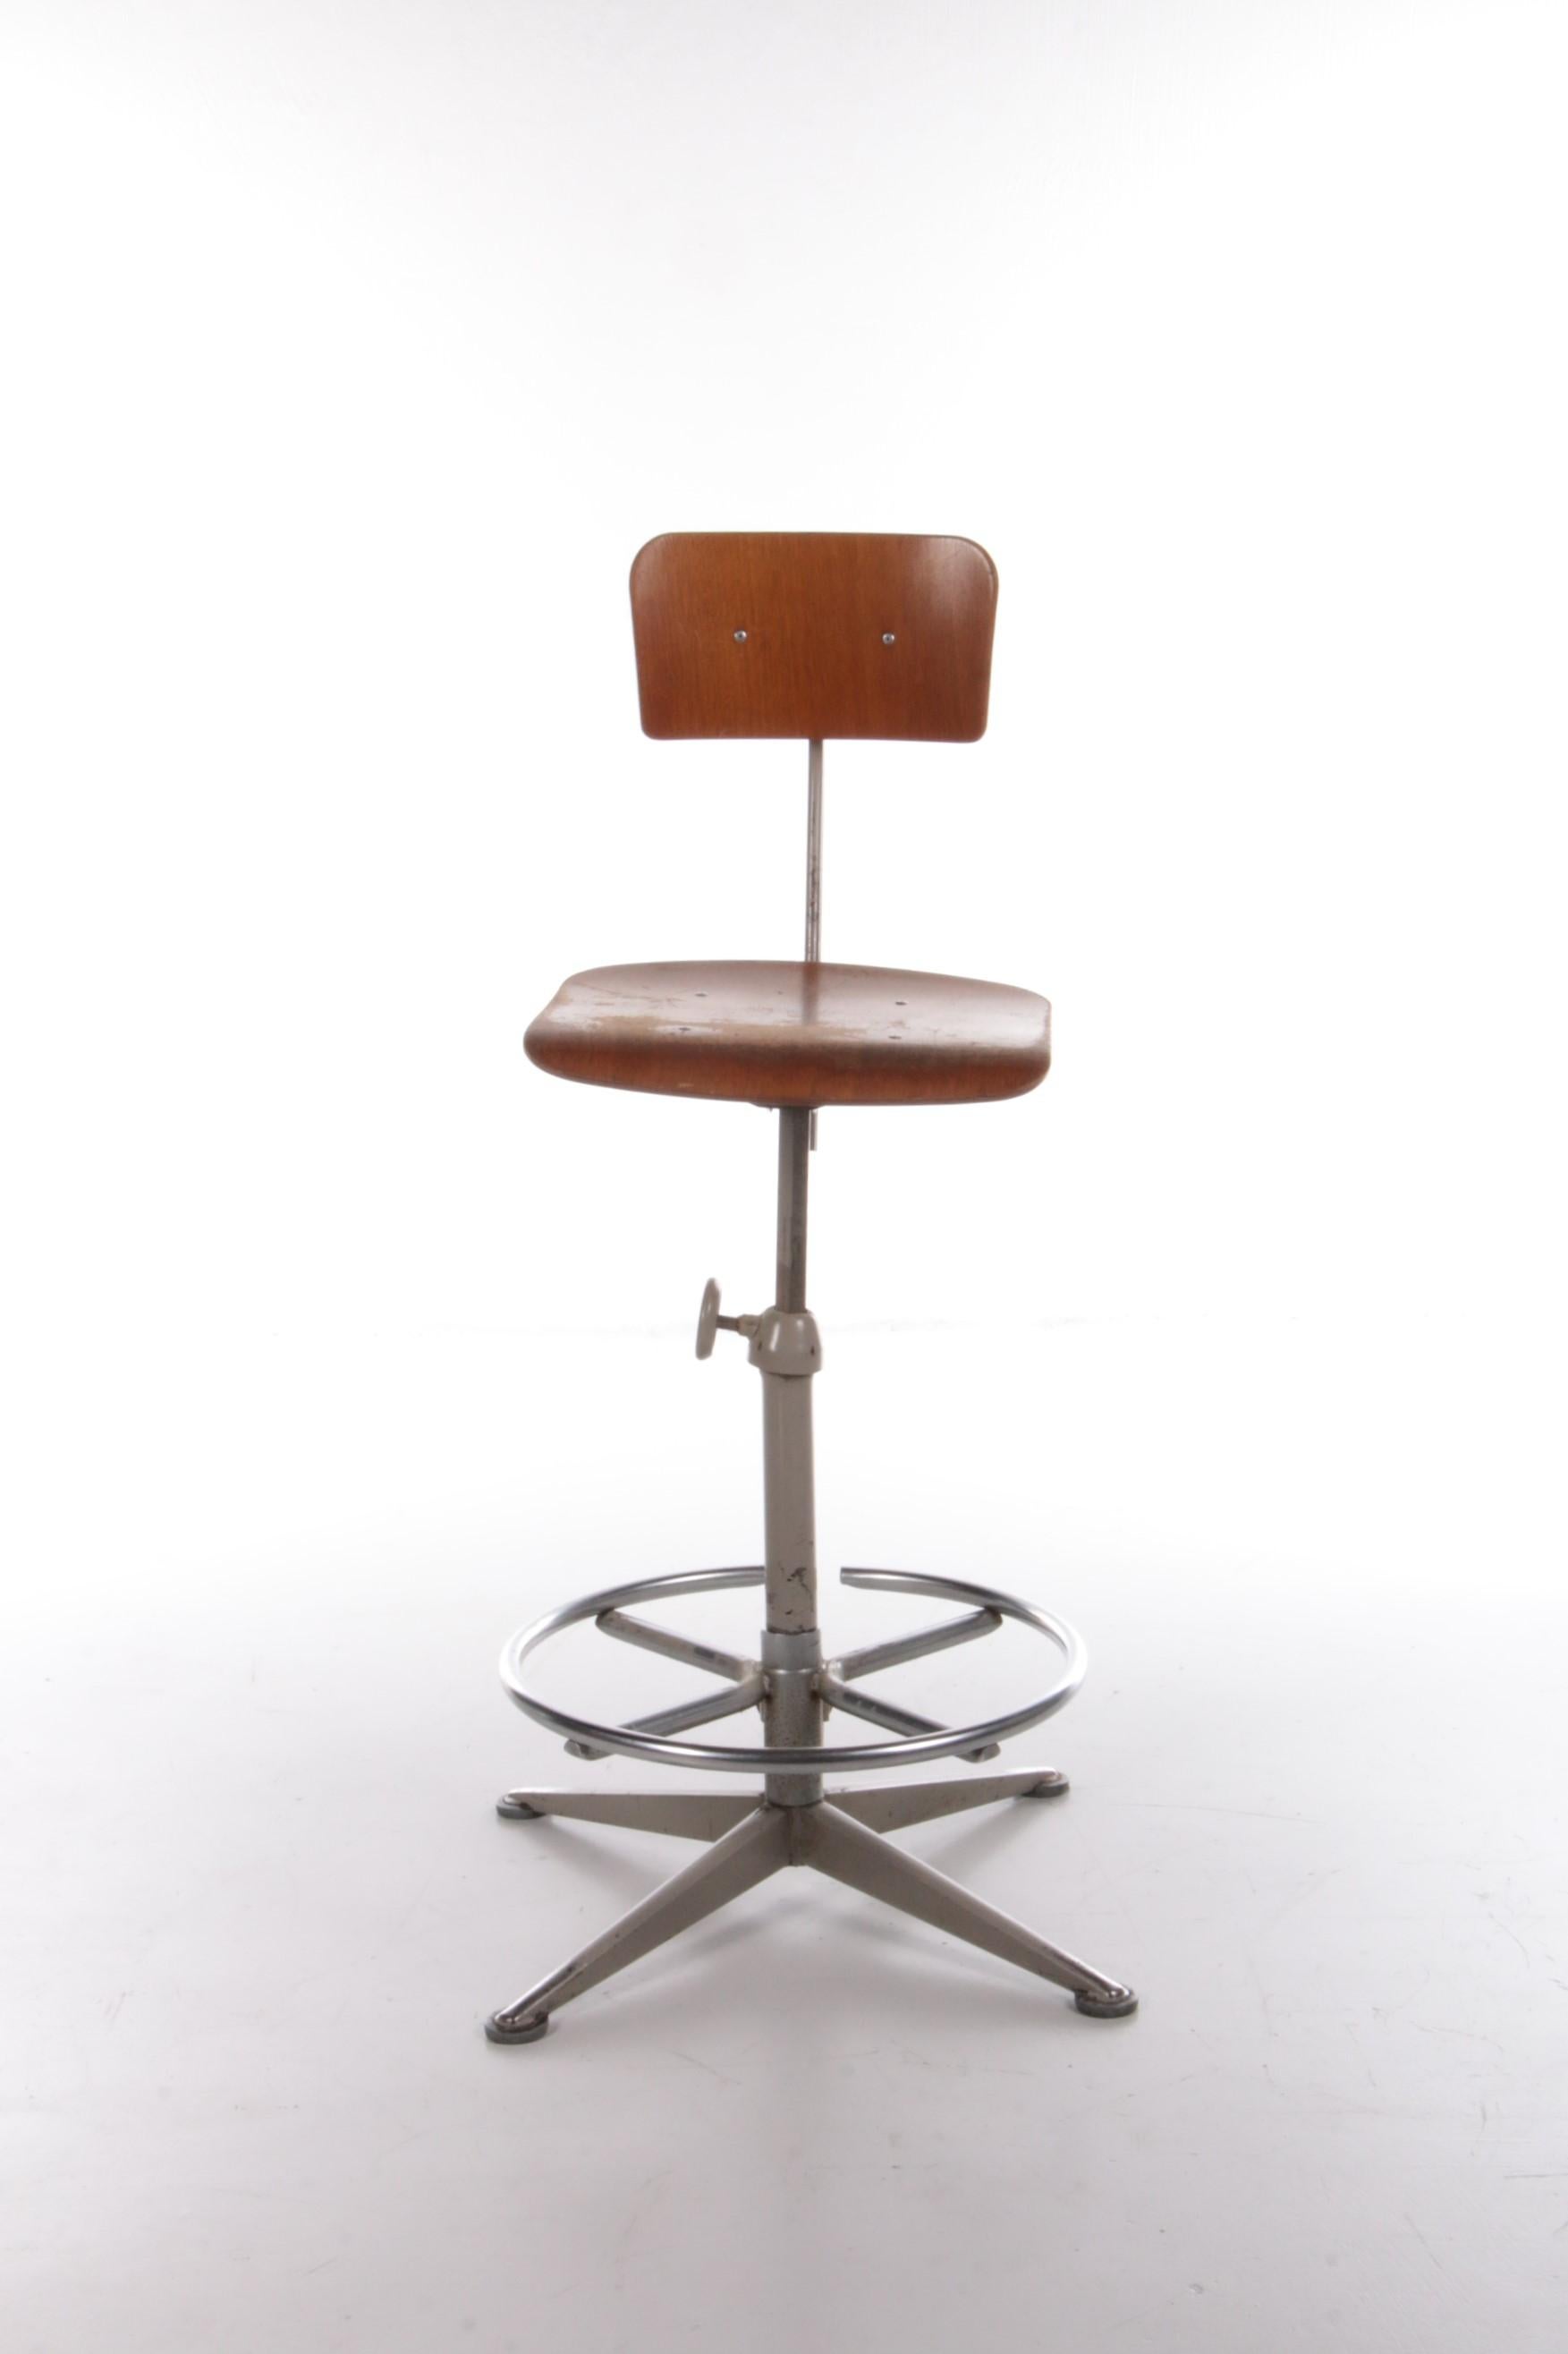 Mid-Century Modern Industrial Drawing Table Chair by Friso Kramer for Ahrend, ca 1960